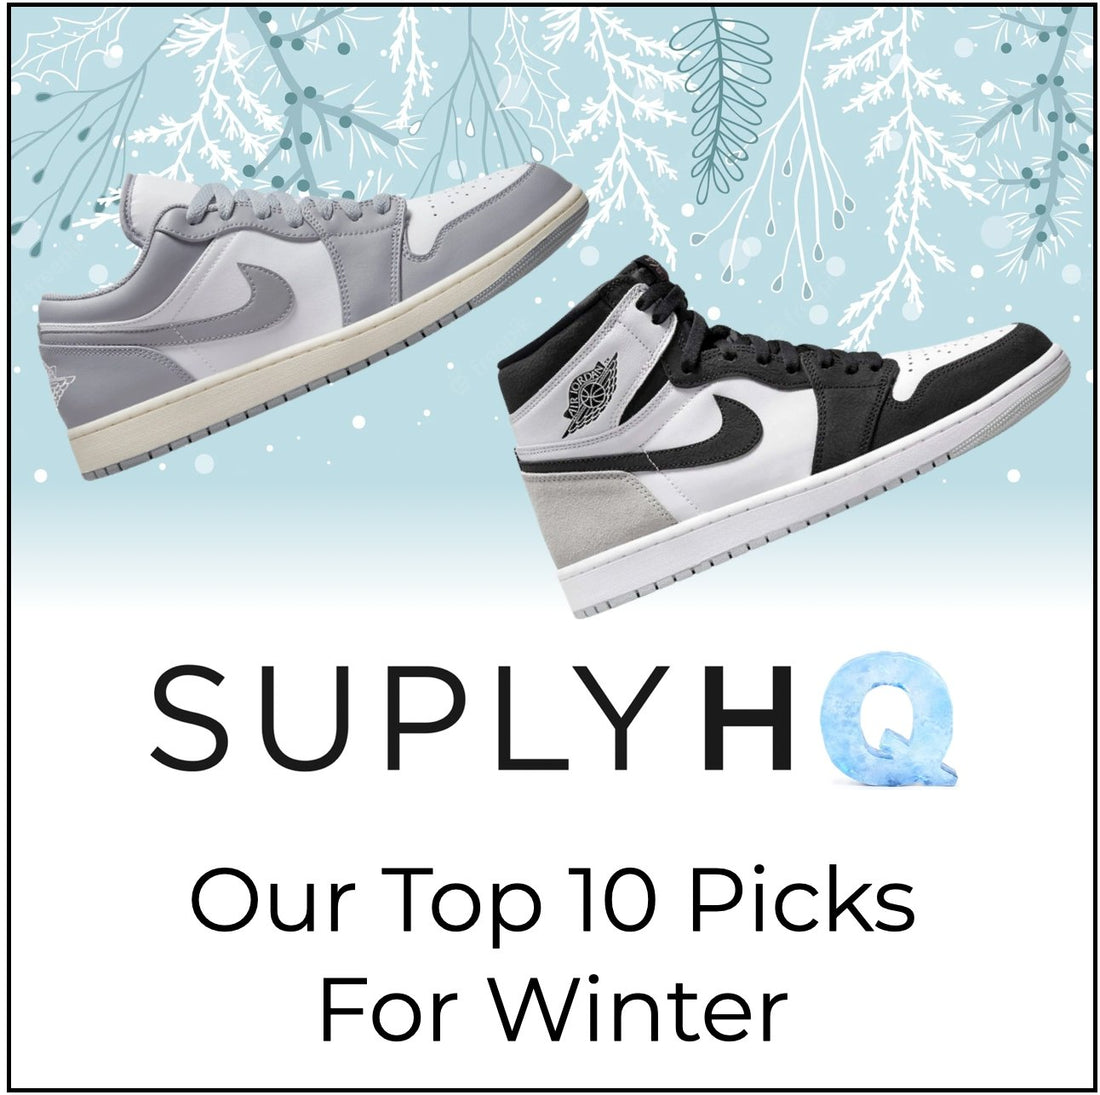 Our Top 10 Picks For Winter - suplyhq.com